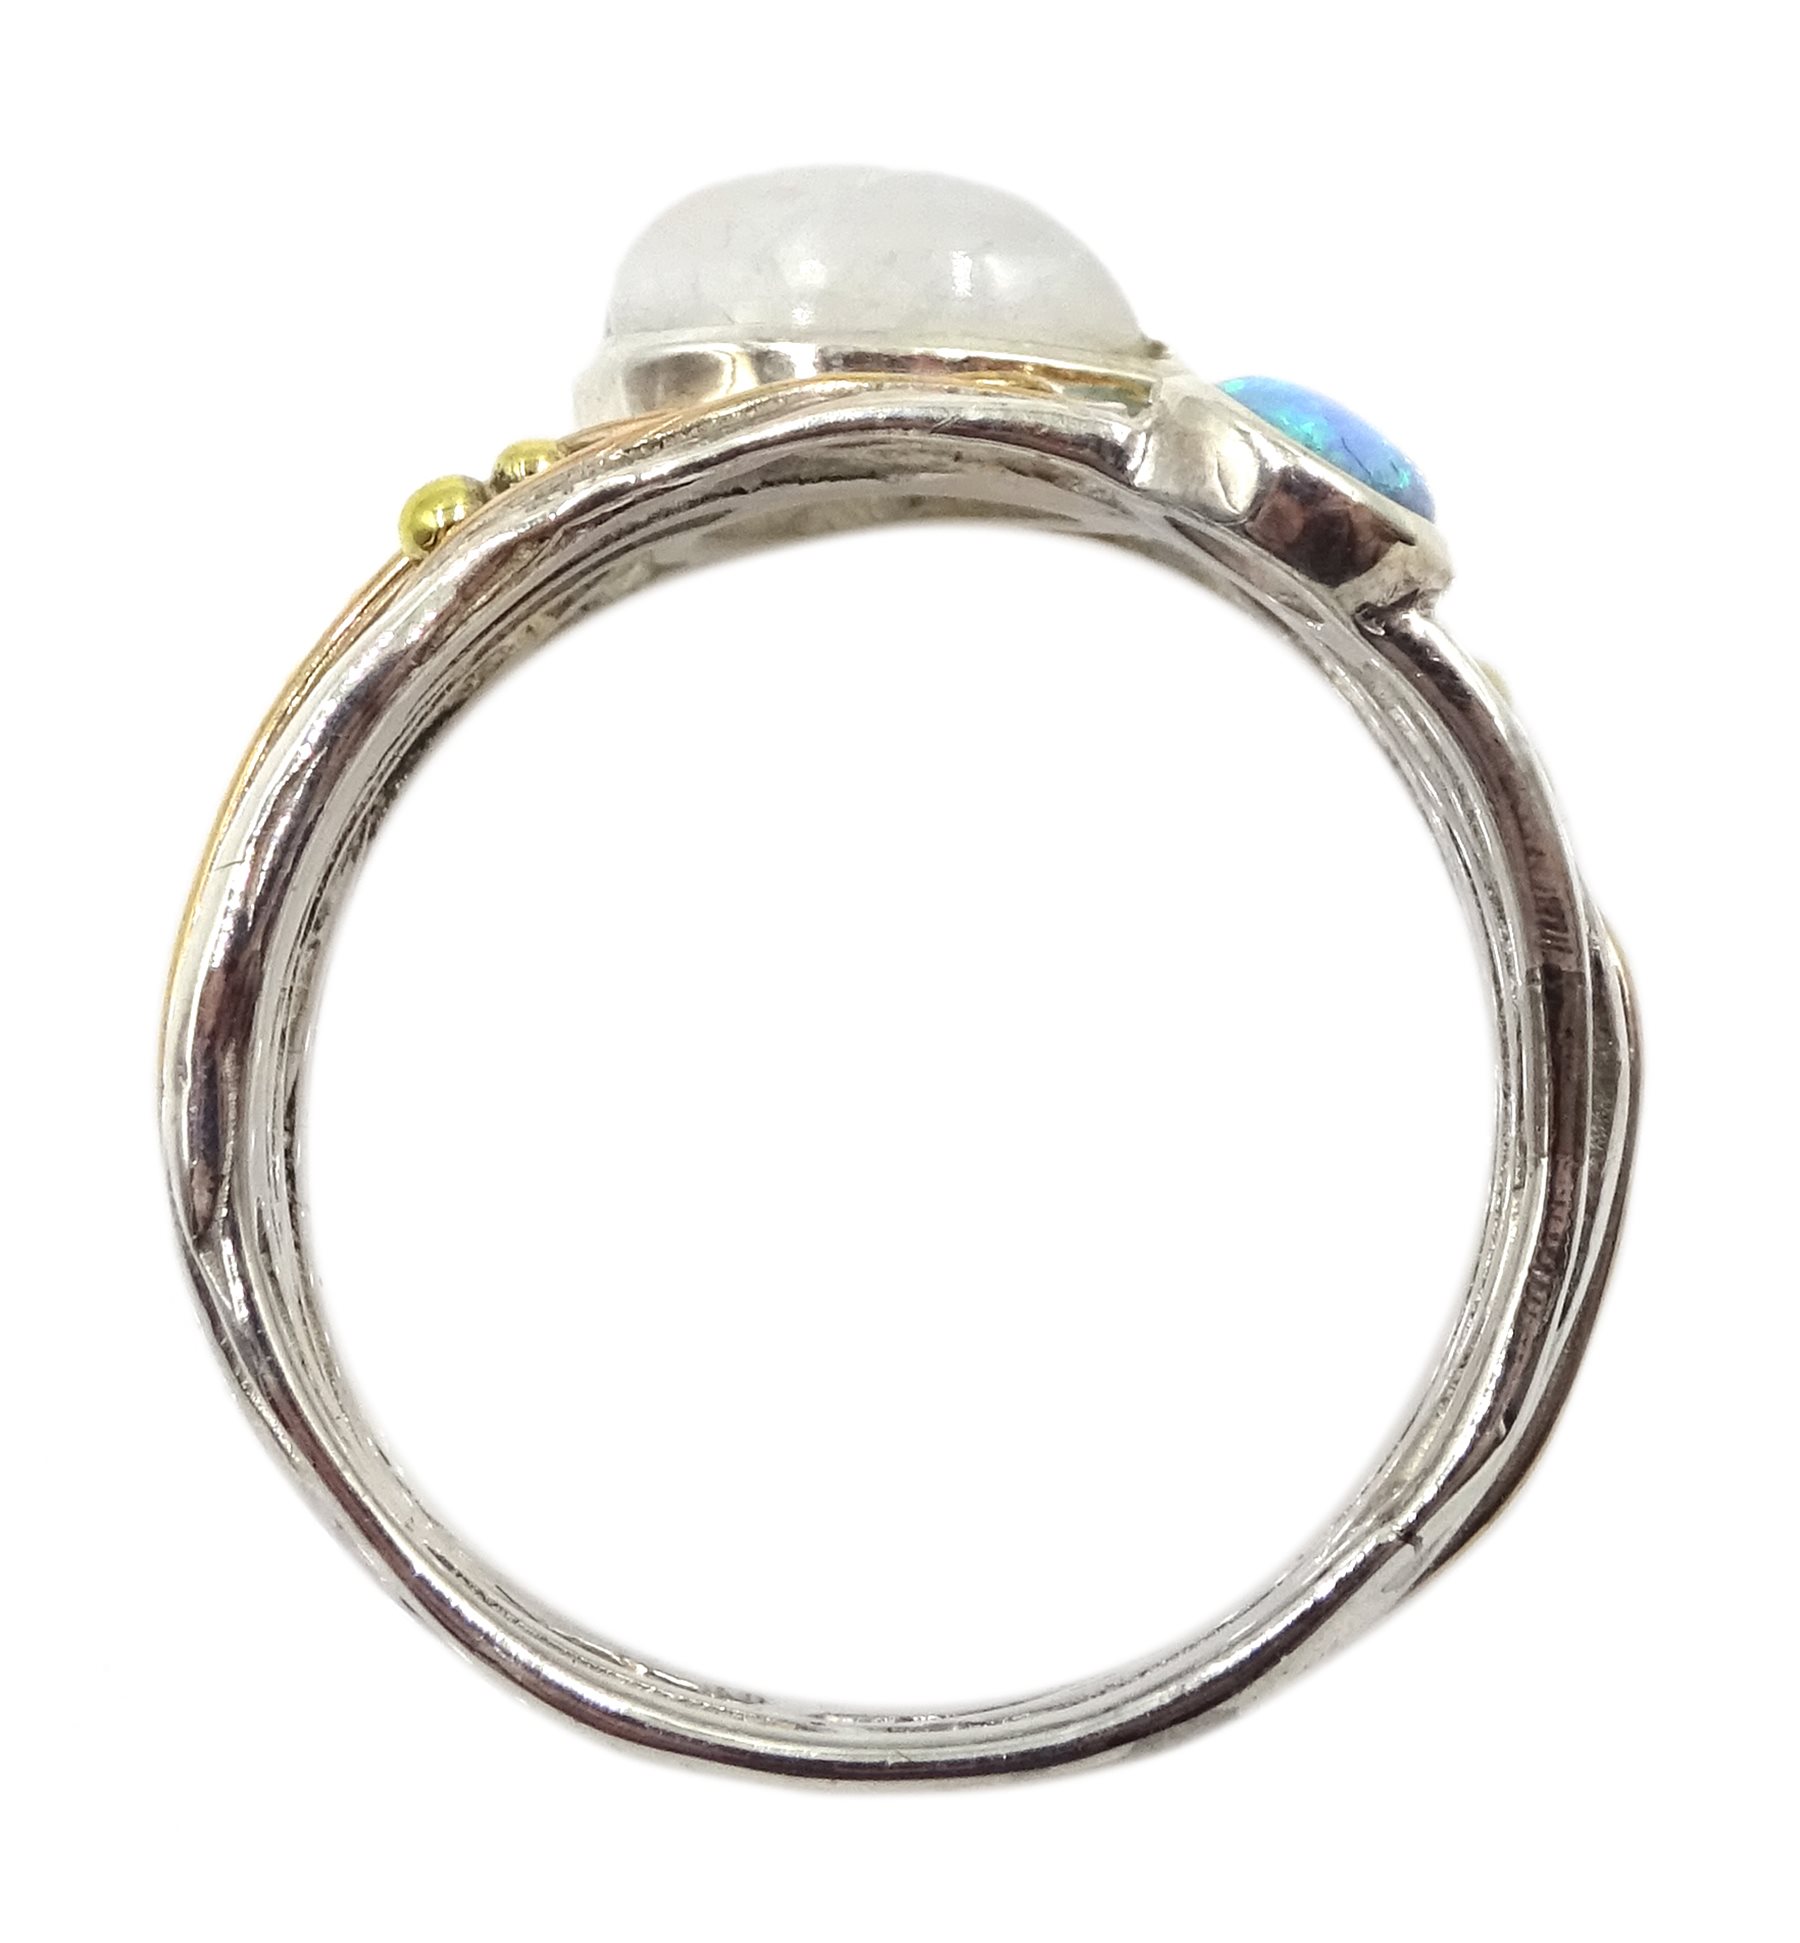 Silver and 14ct gold wire moonstone and opal ring, stamped 925 - Image 4 of 4